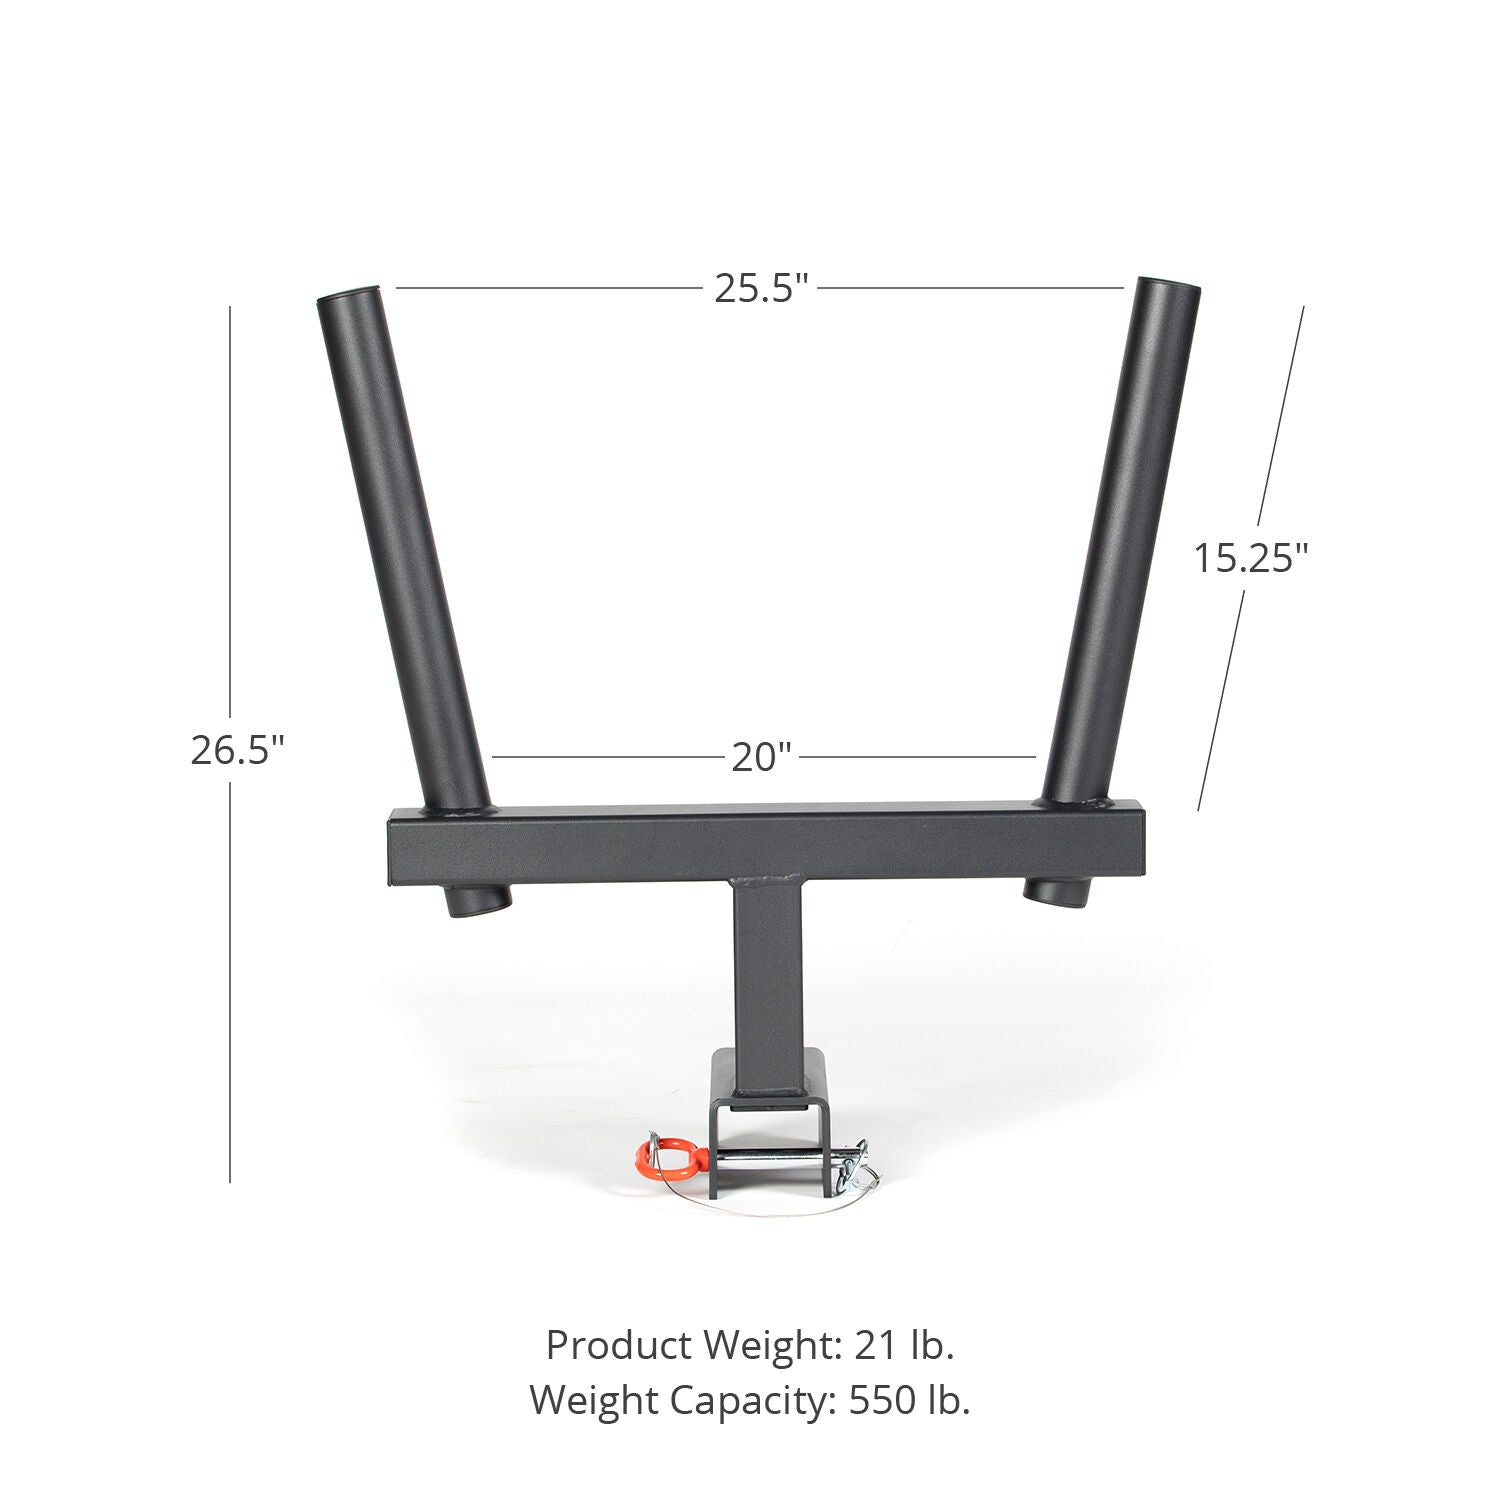 A front-facing view of a black, metallic Titan Fitness X-3 Series Y-Dip Attachment with dimensions: width 20 inches, height 26.5 inches, and depth 25.5